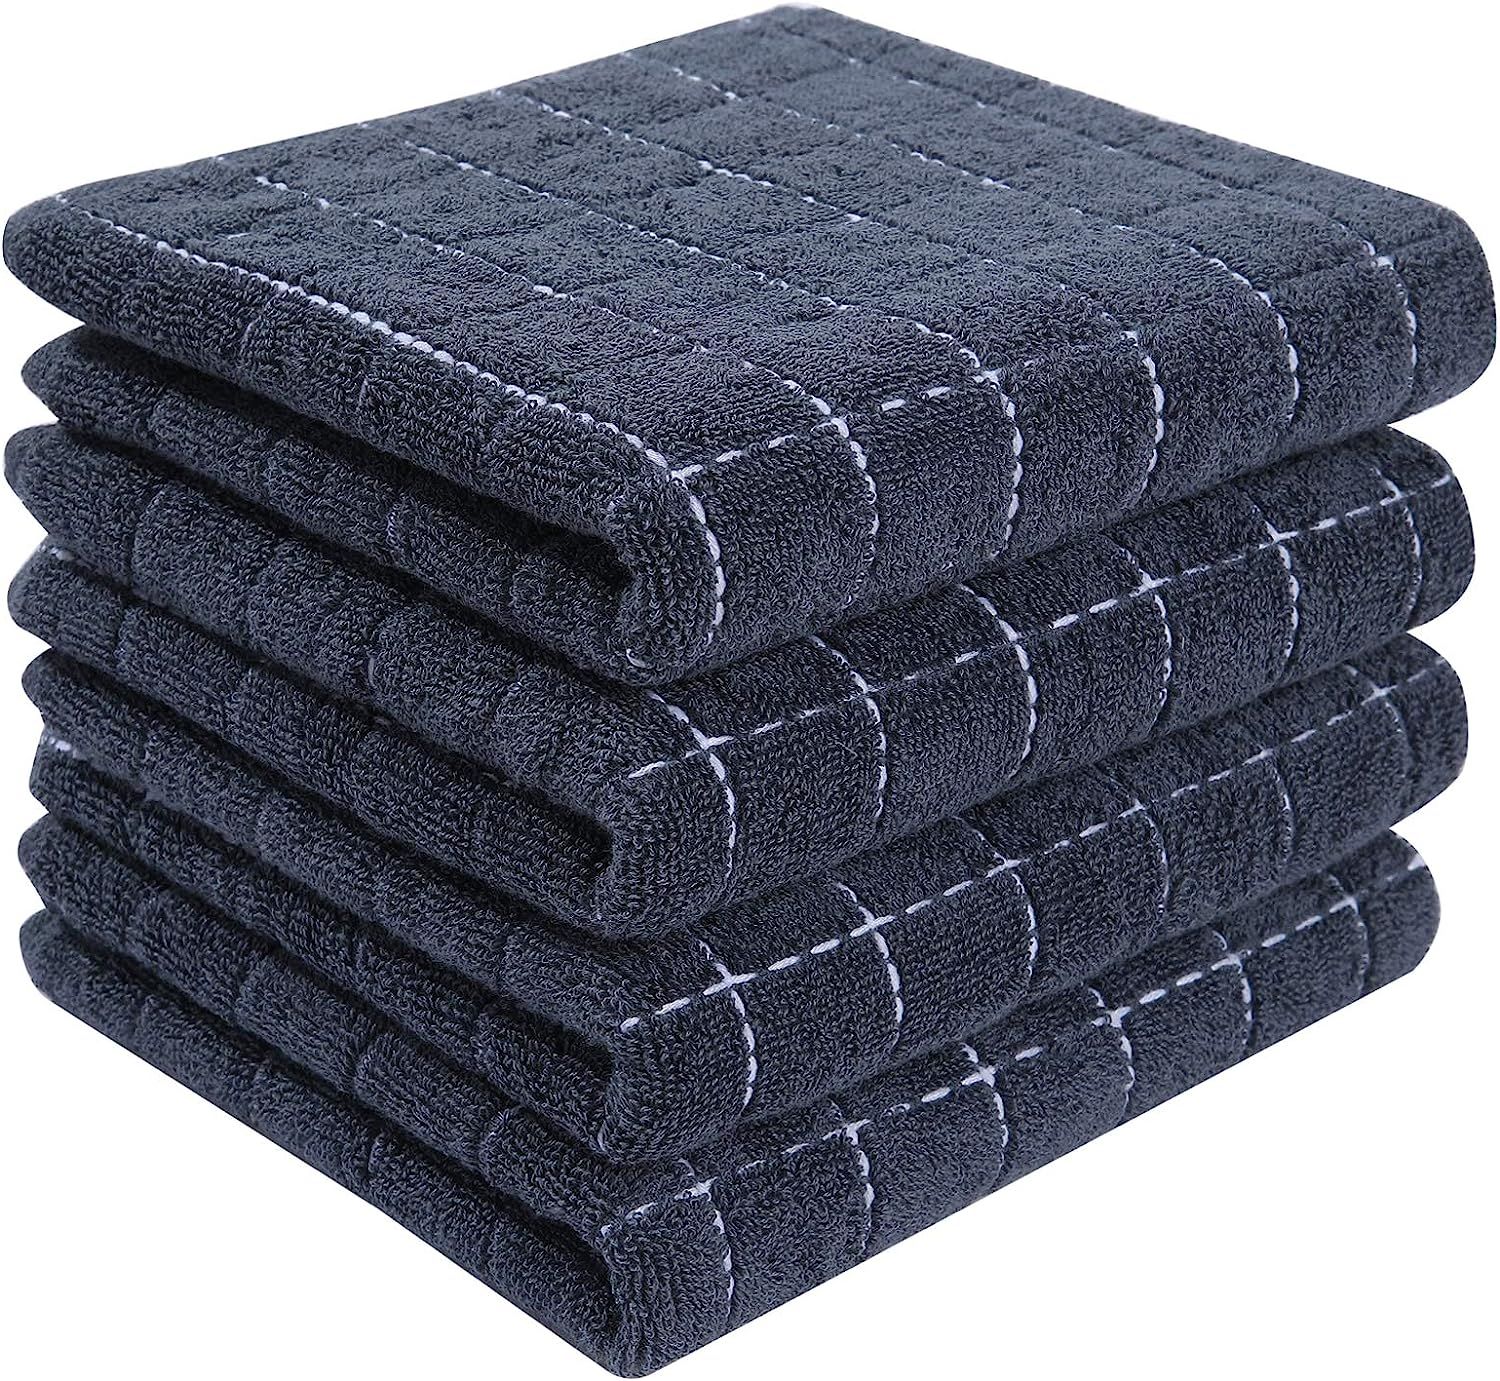 Homaxy 100% Cotton Terry Kitchen Towels(Dark Grey, 13 x 28 inches), Checkered Designed, Soft and ... | Amazon (US)